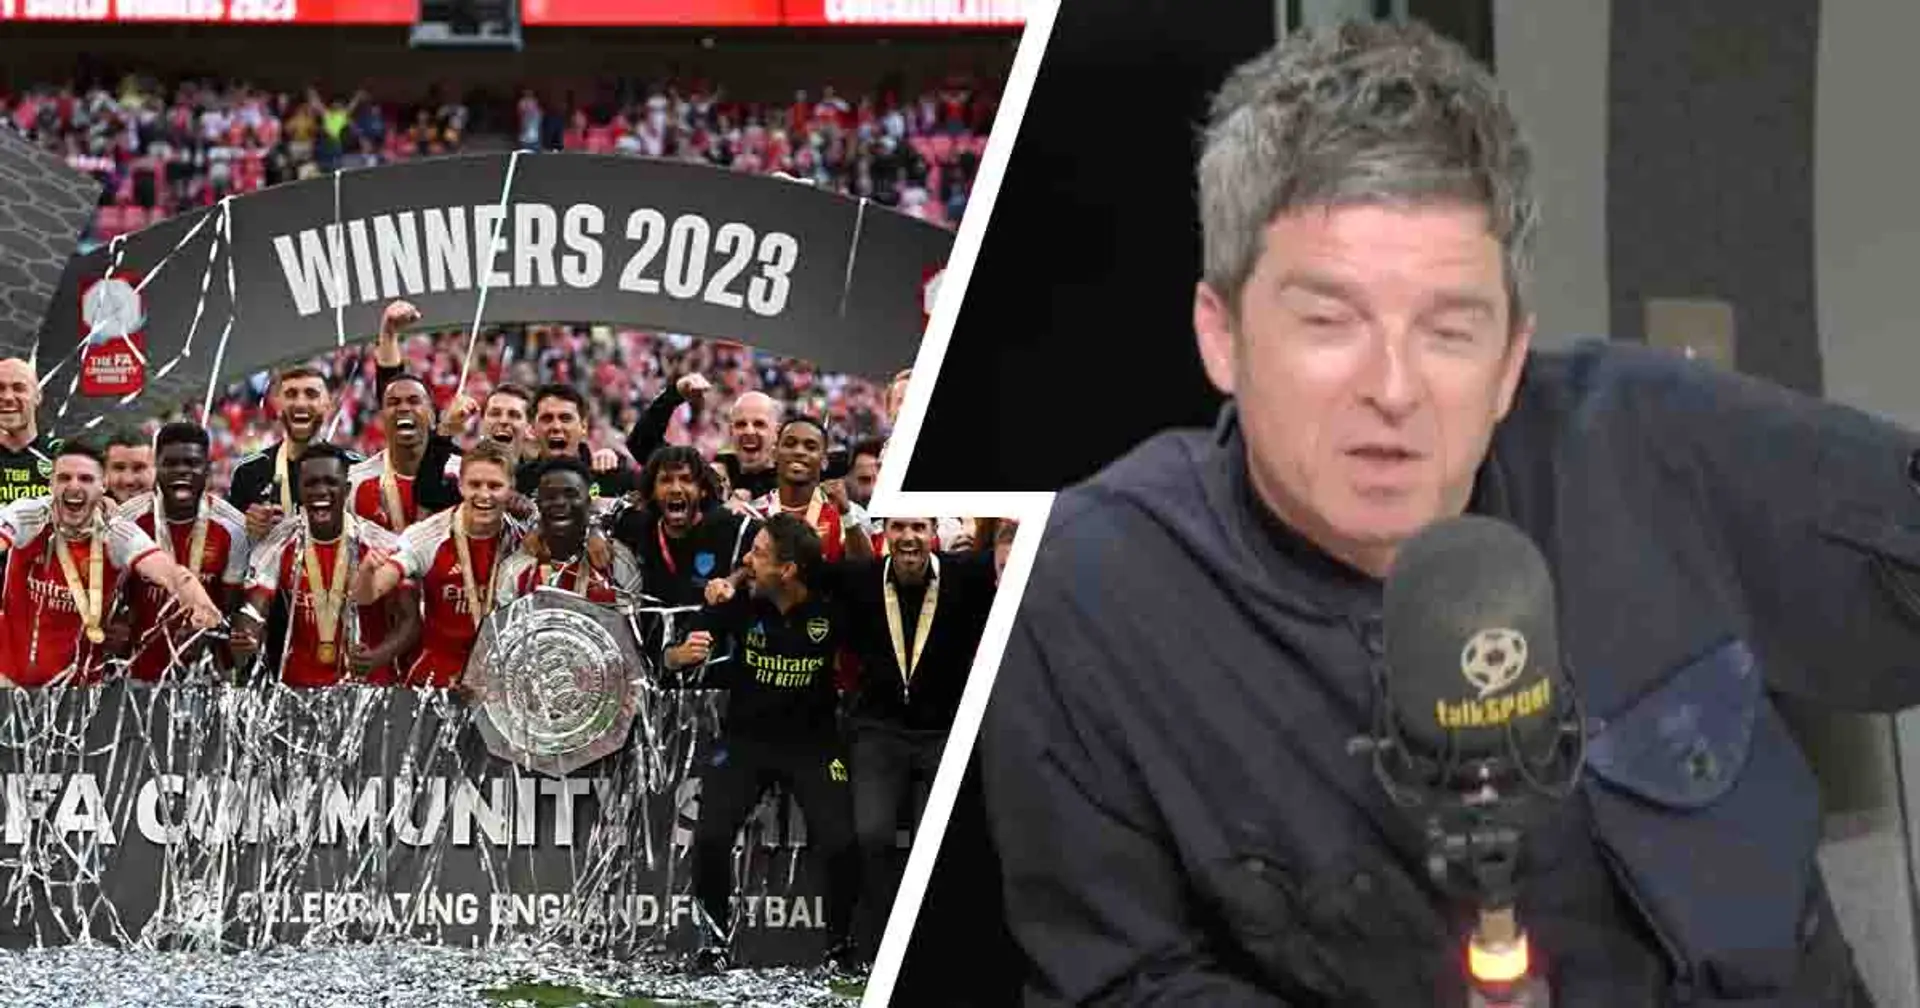 'They tend to bottle it': Man City superfan Noel Gallagher discards Arsenal's chances of winning PL title